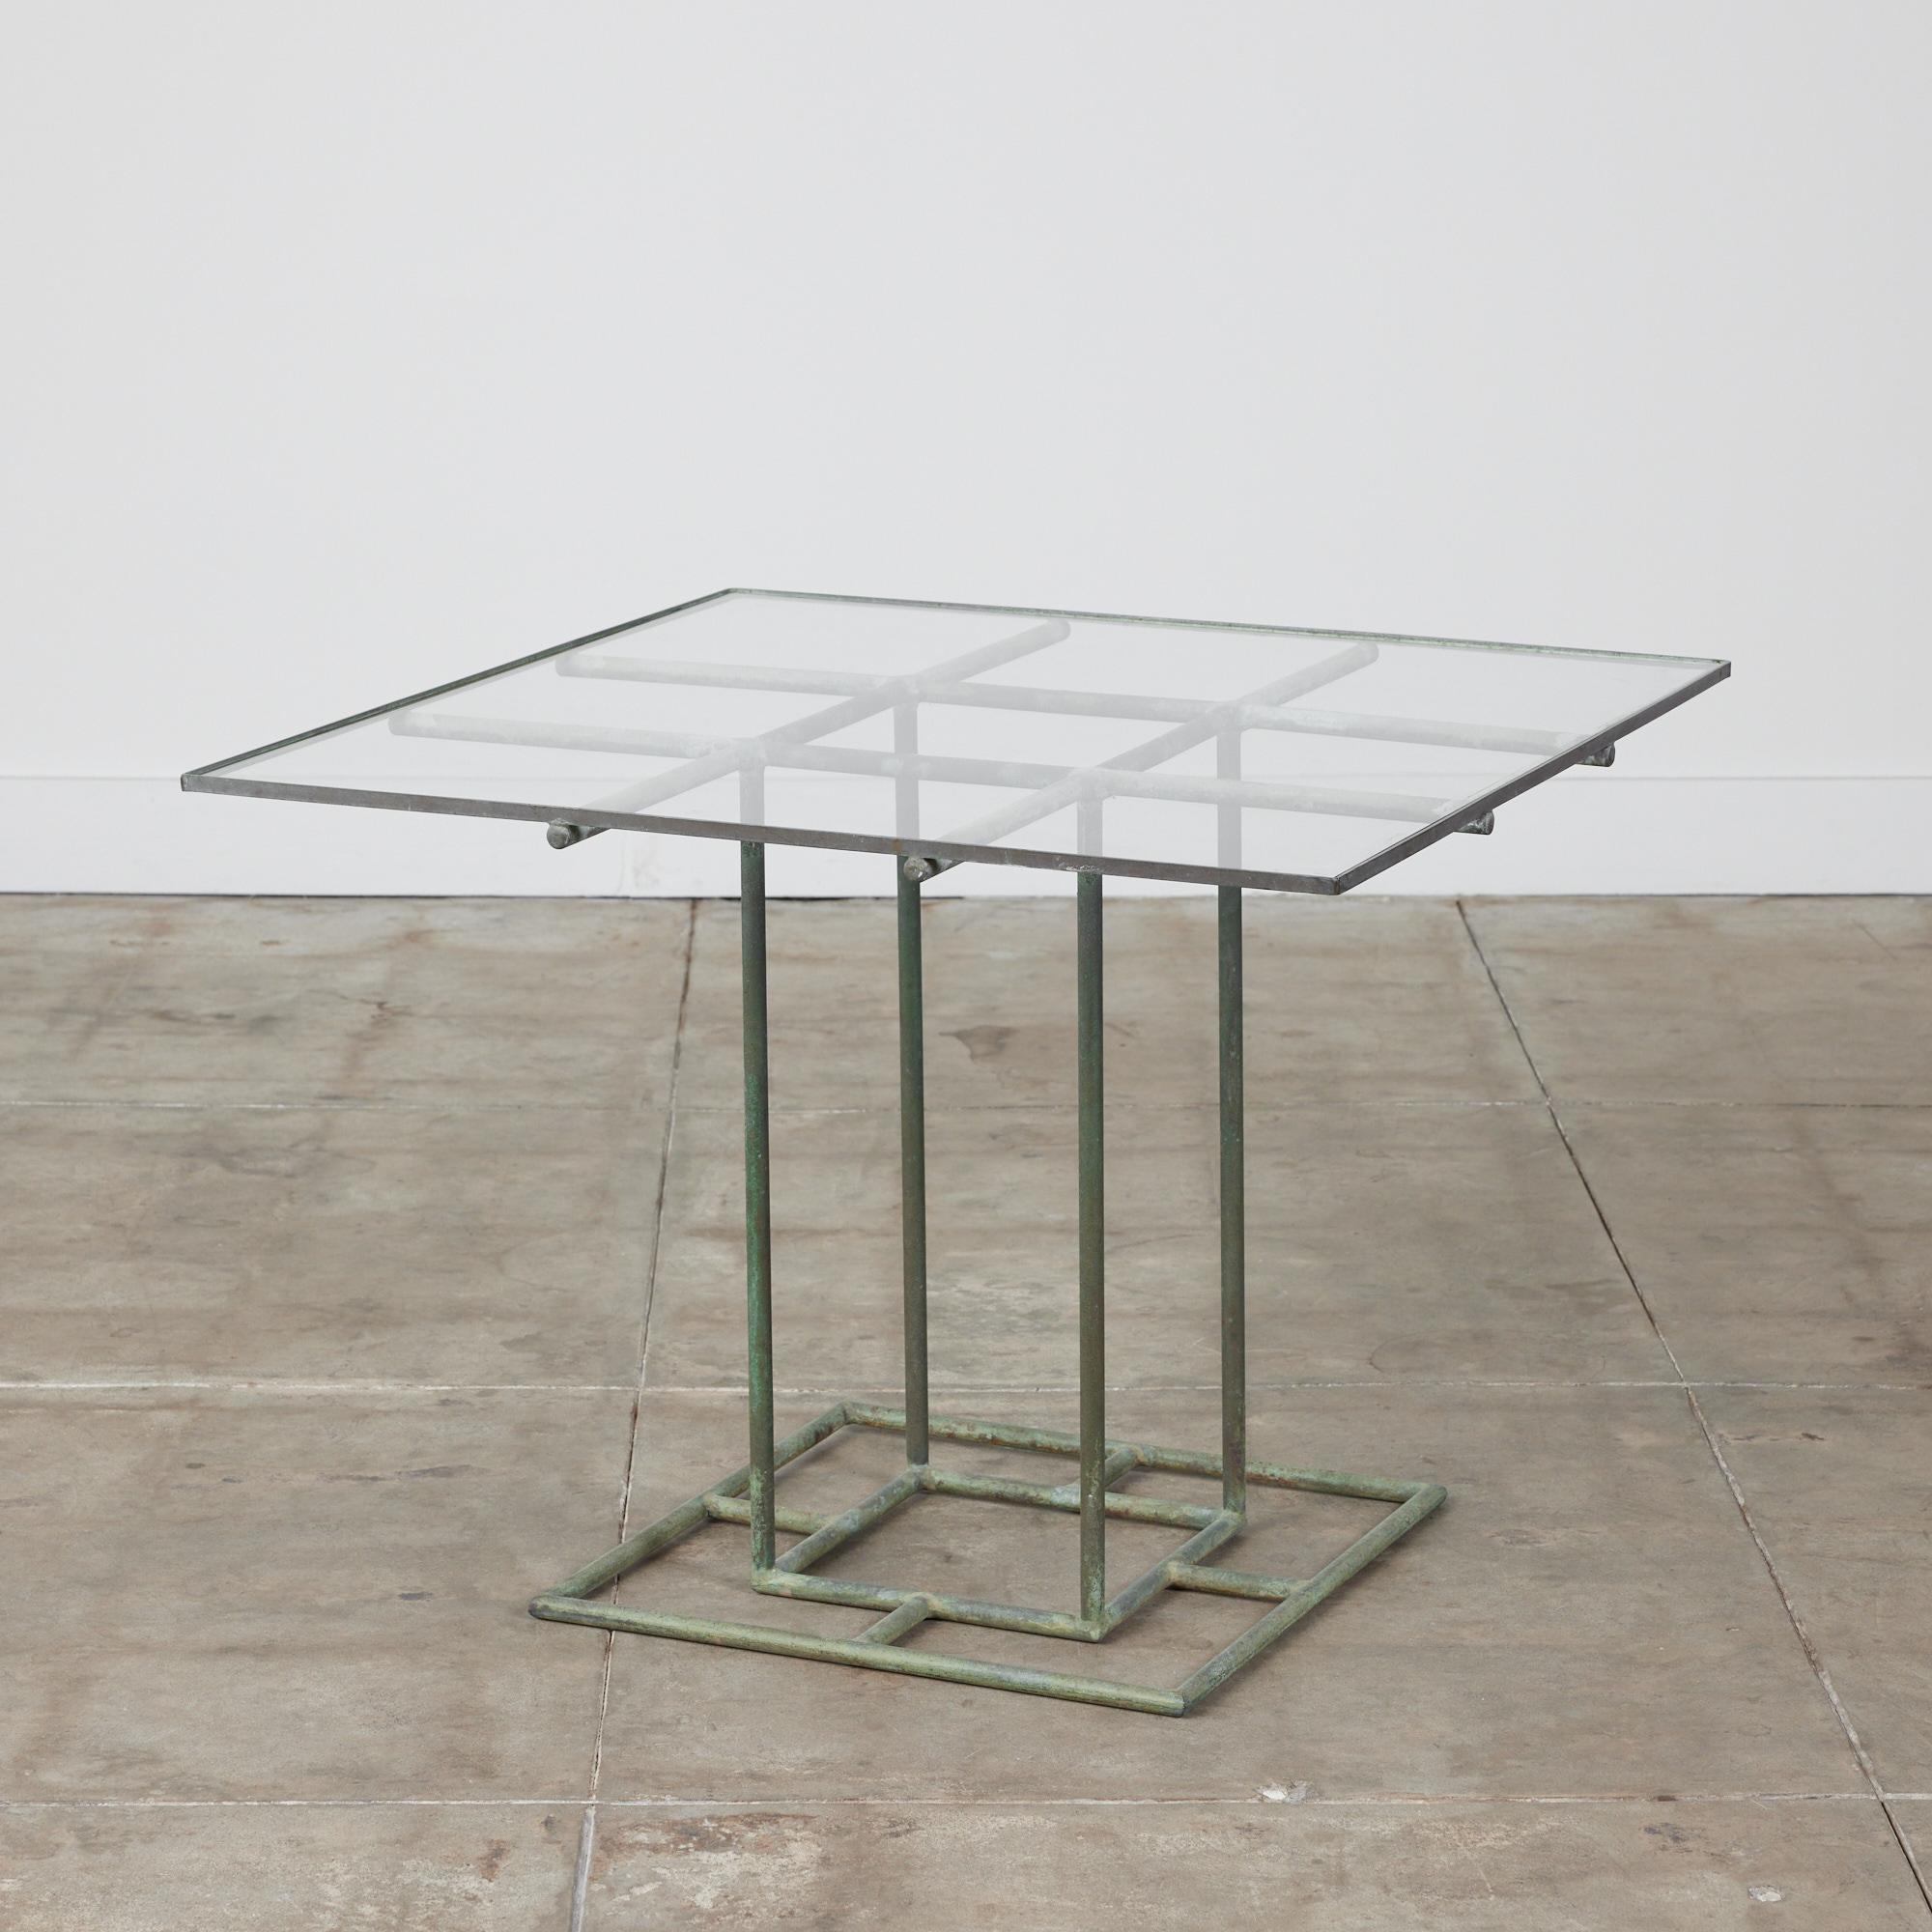 Square patio table designed by Walter Lamb from the late 40s or early 50s, either predating or from the early years of his work with Brown Jordan. The table has a glass table top that rests on a a tubular patinated bronze base. Its subtle geometry